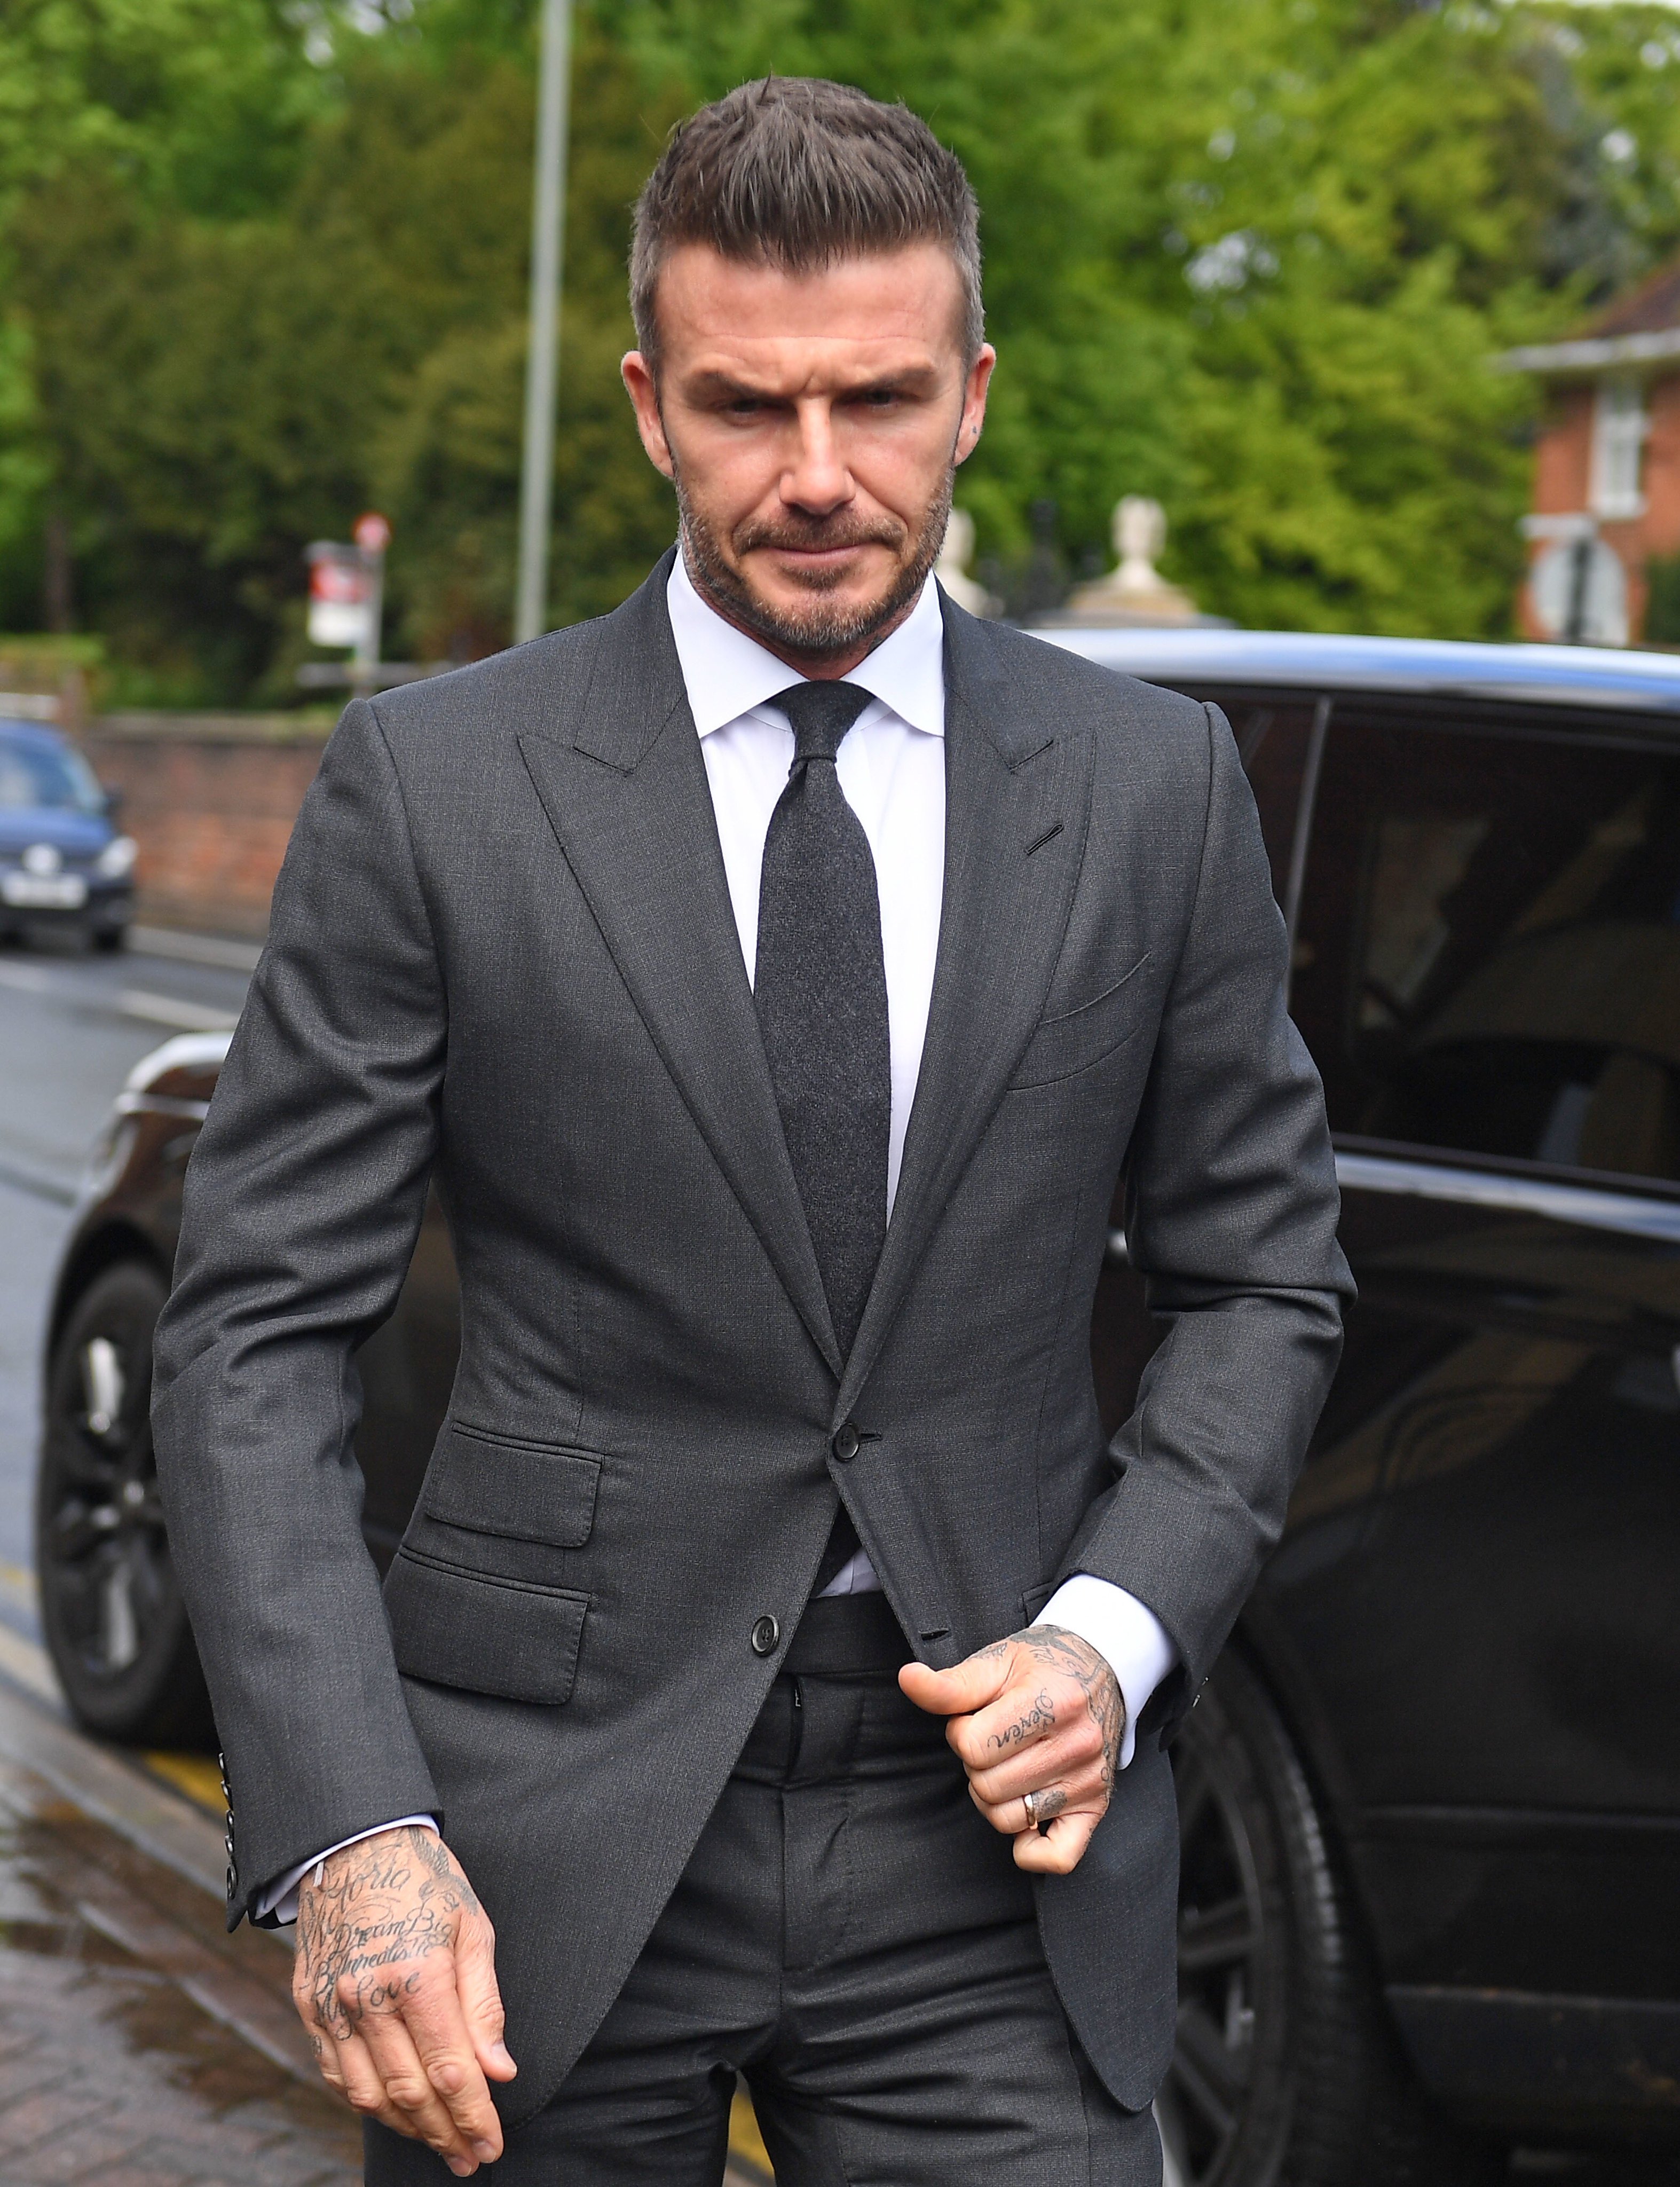 6 Swoonworthy Pics of David Beckham That Make a Case for Suits as